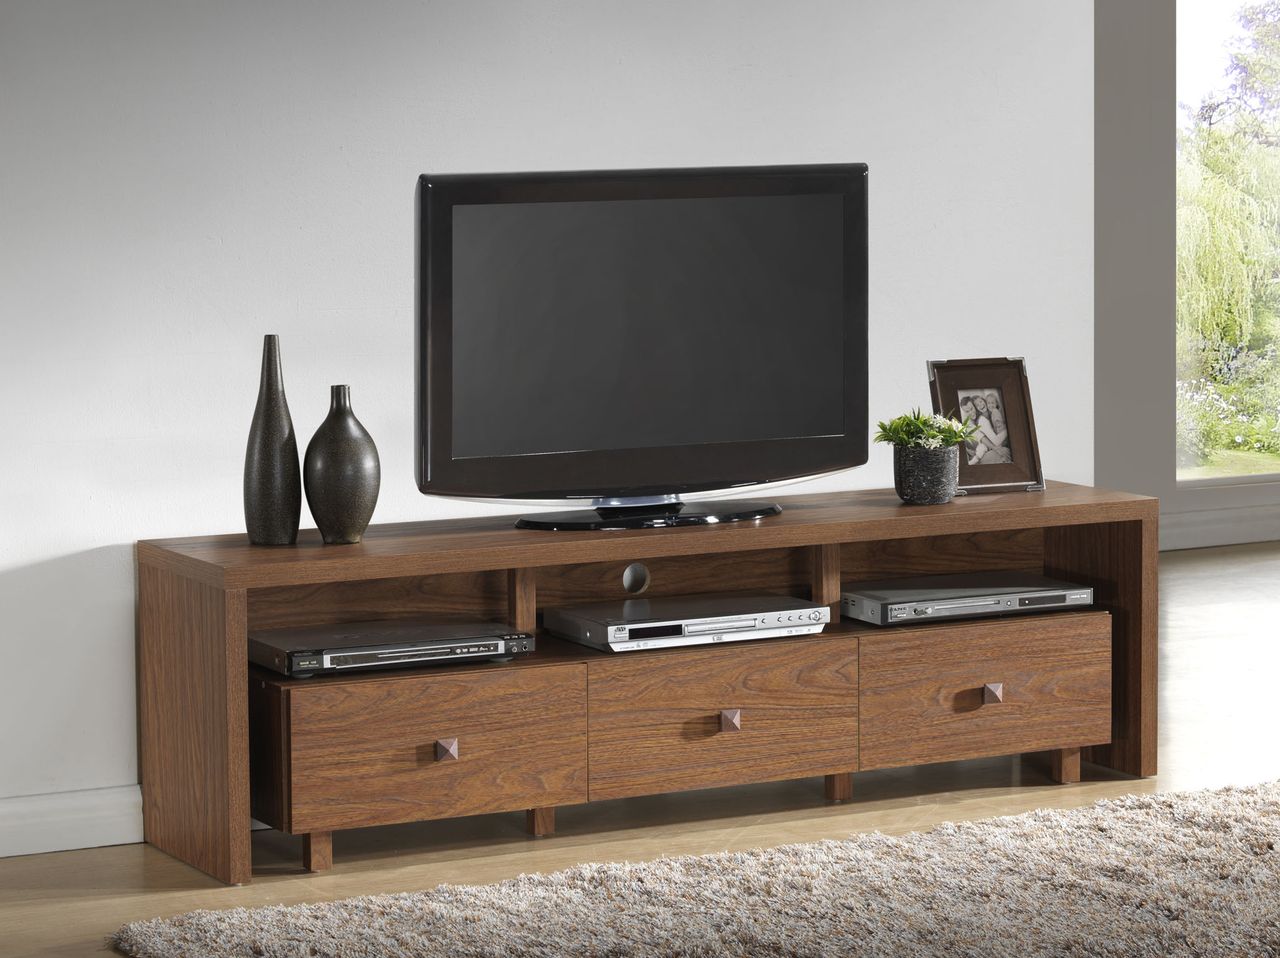 Techni Mobili Palma TV Cabinet for TVs up to 75", 3-Drawer Storage in Multiple Finishes - image 1 of 4